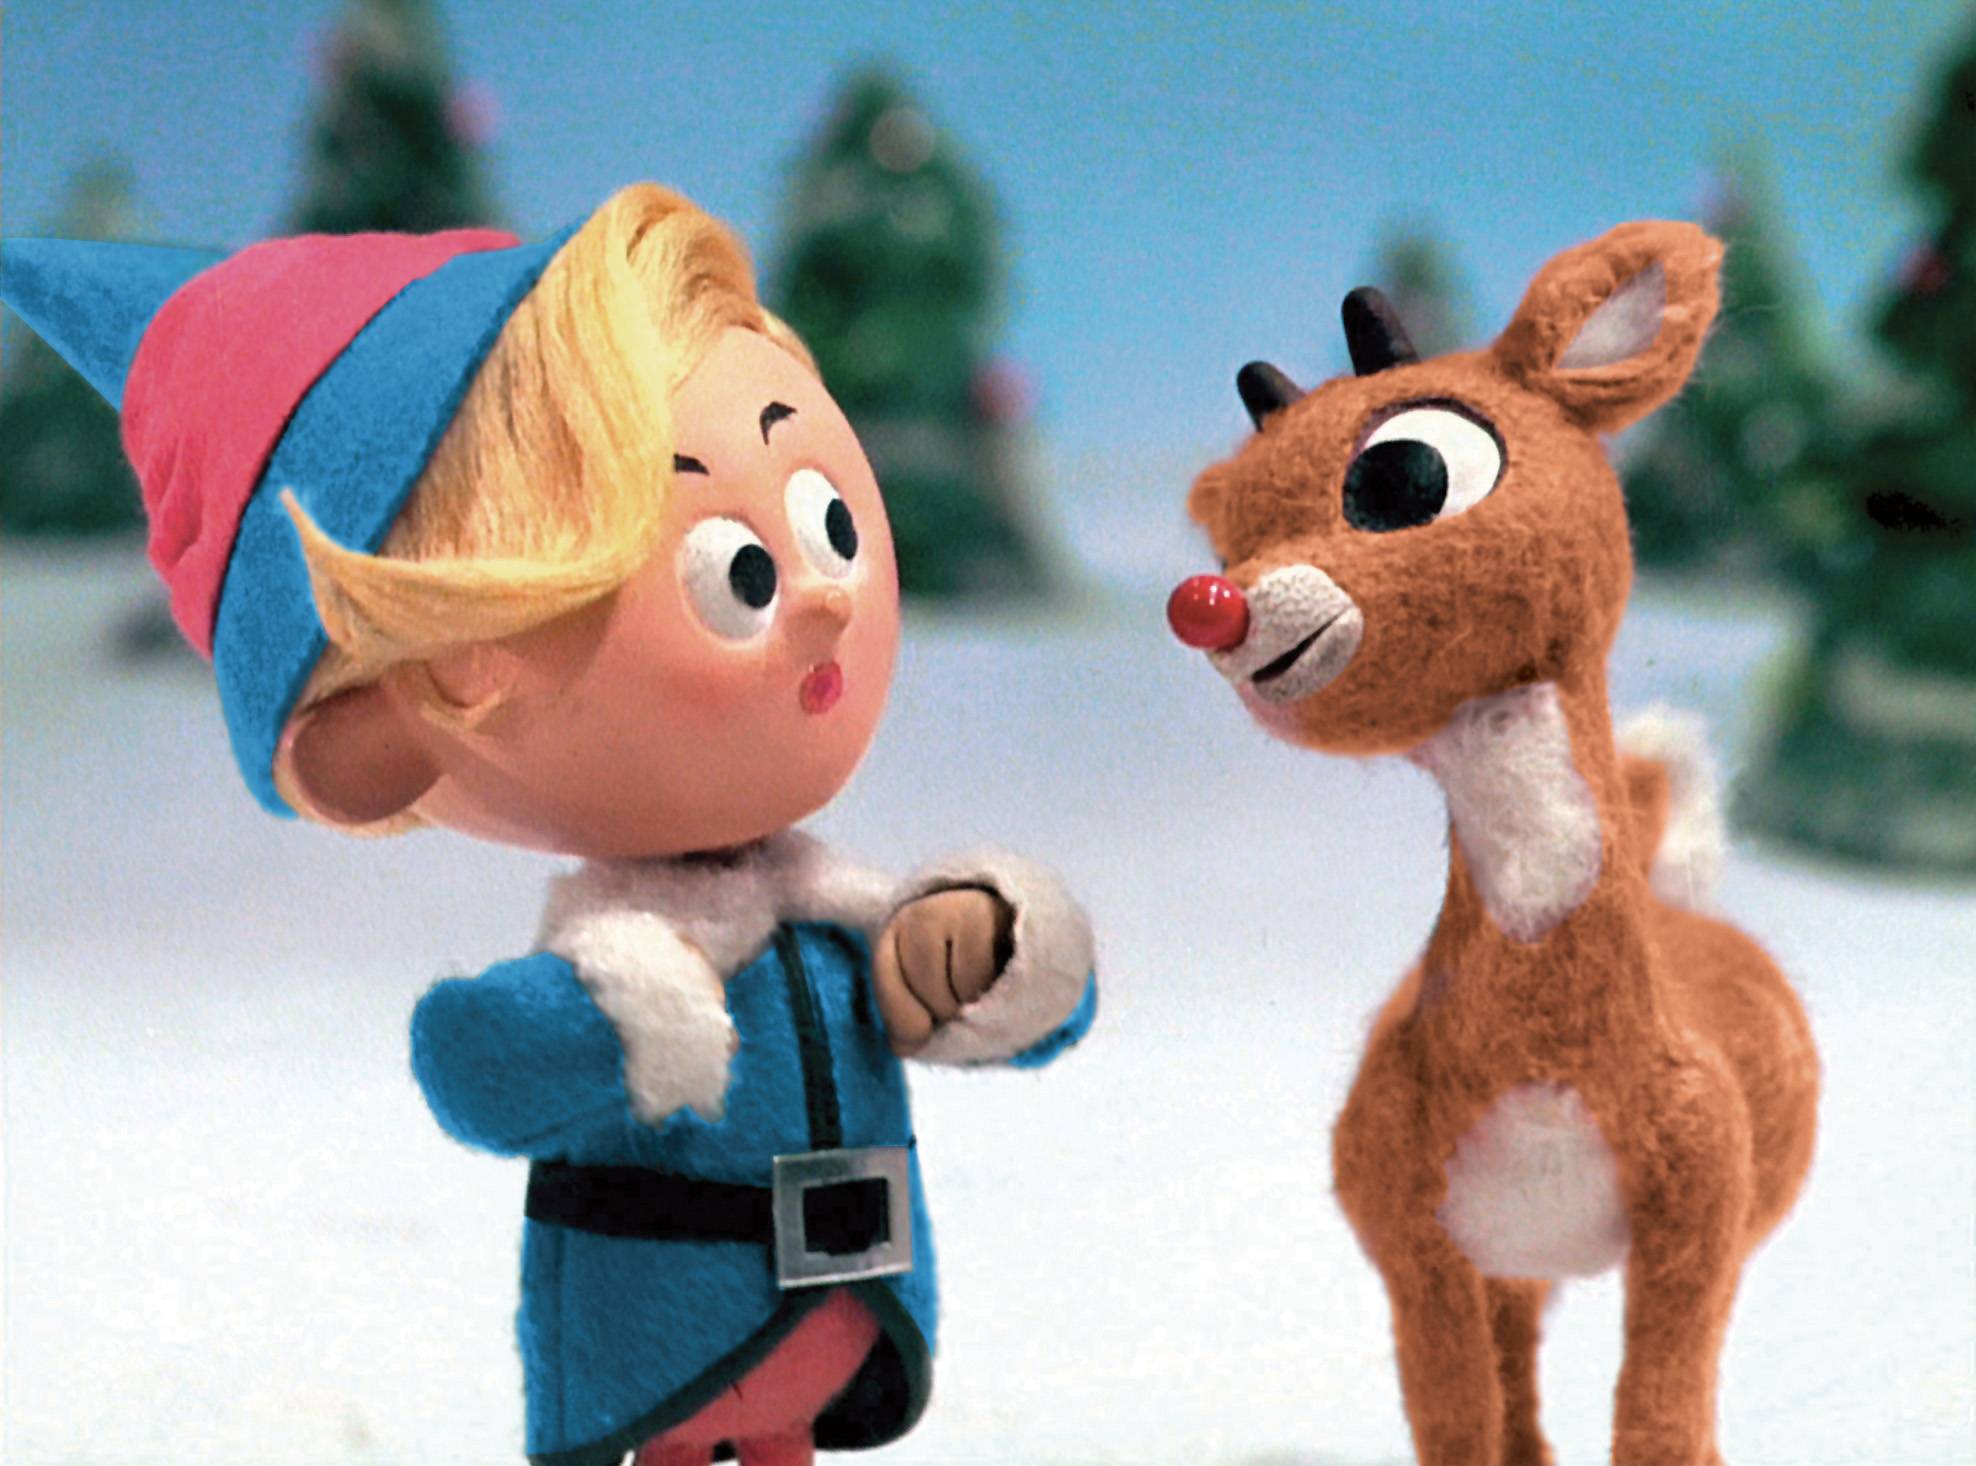 Great Rudolph The Red Nosed Reindeer Desktop Wallpaper of all time Learn more here 